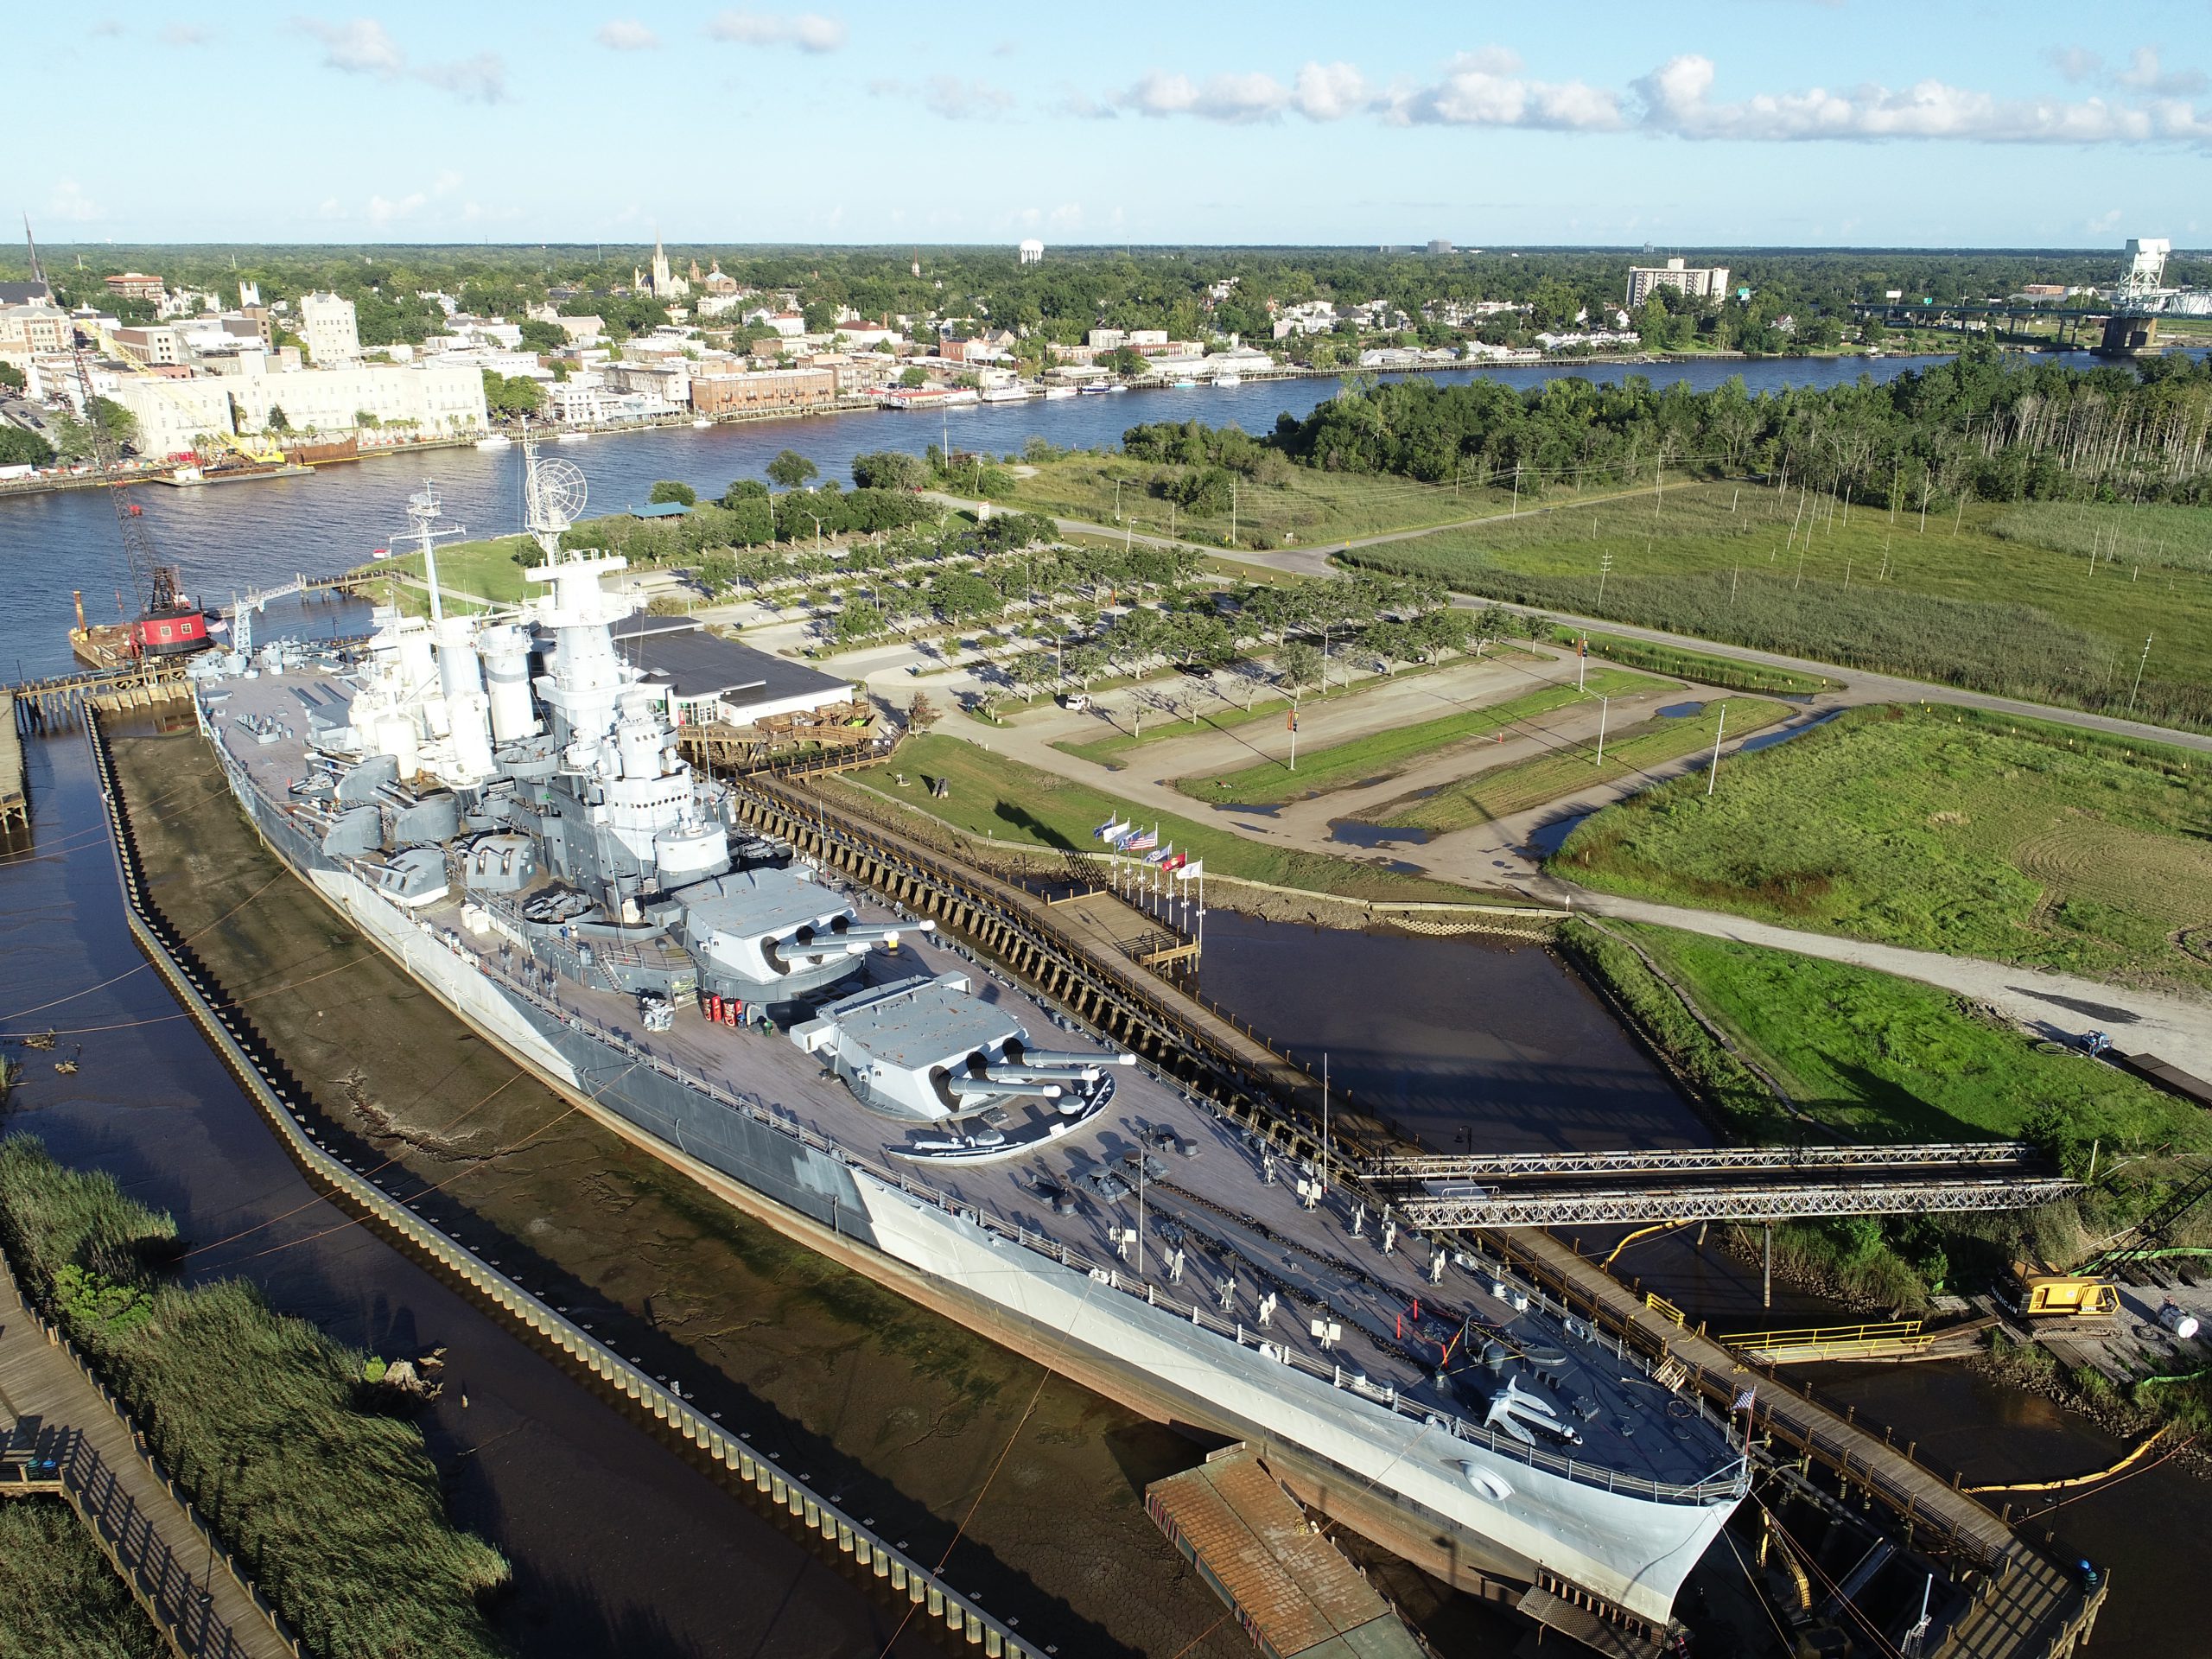 Aerial view of a stationary battleship (USS North Carolina) on a river with an adjacent parking lot